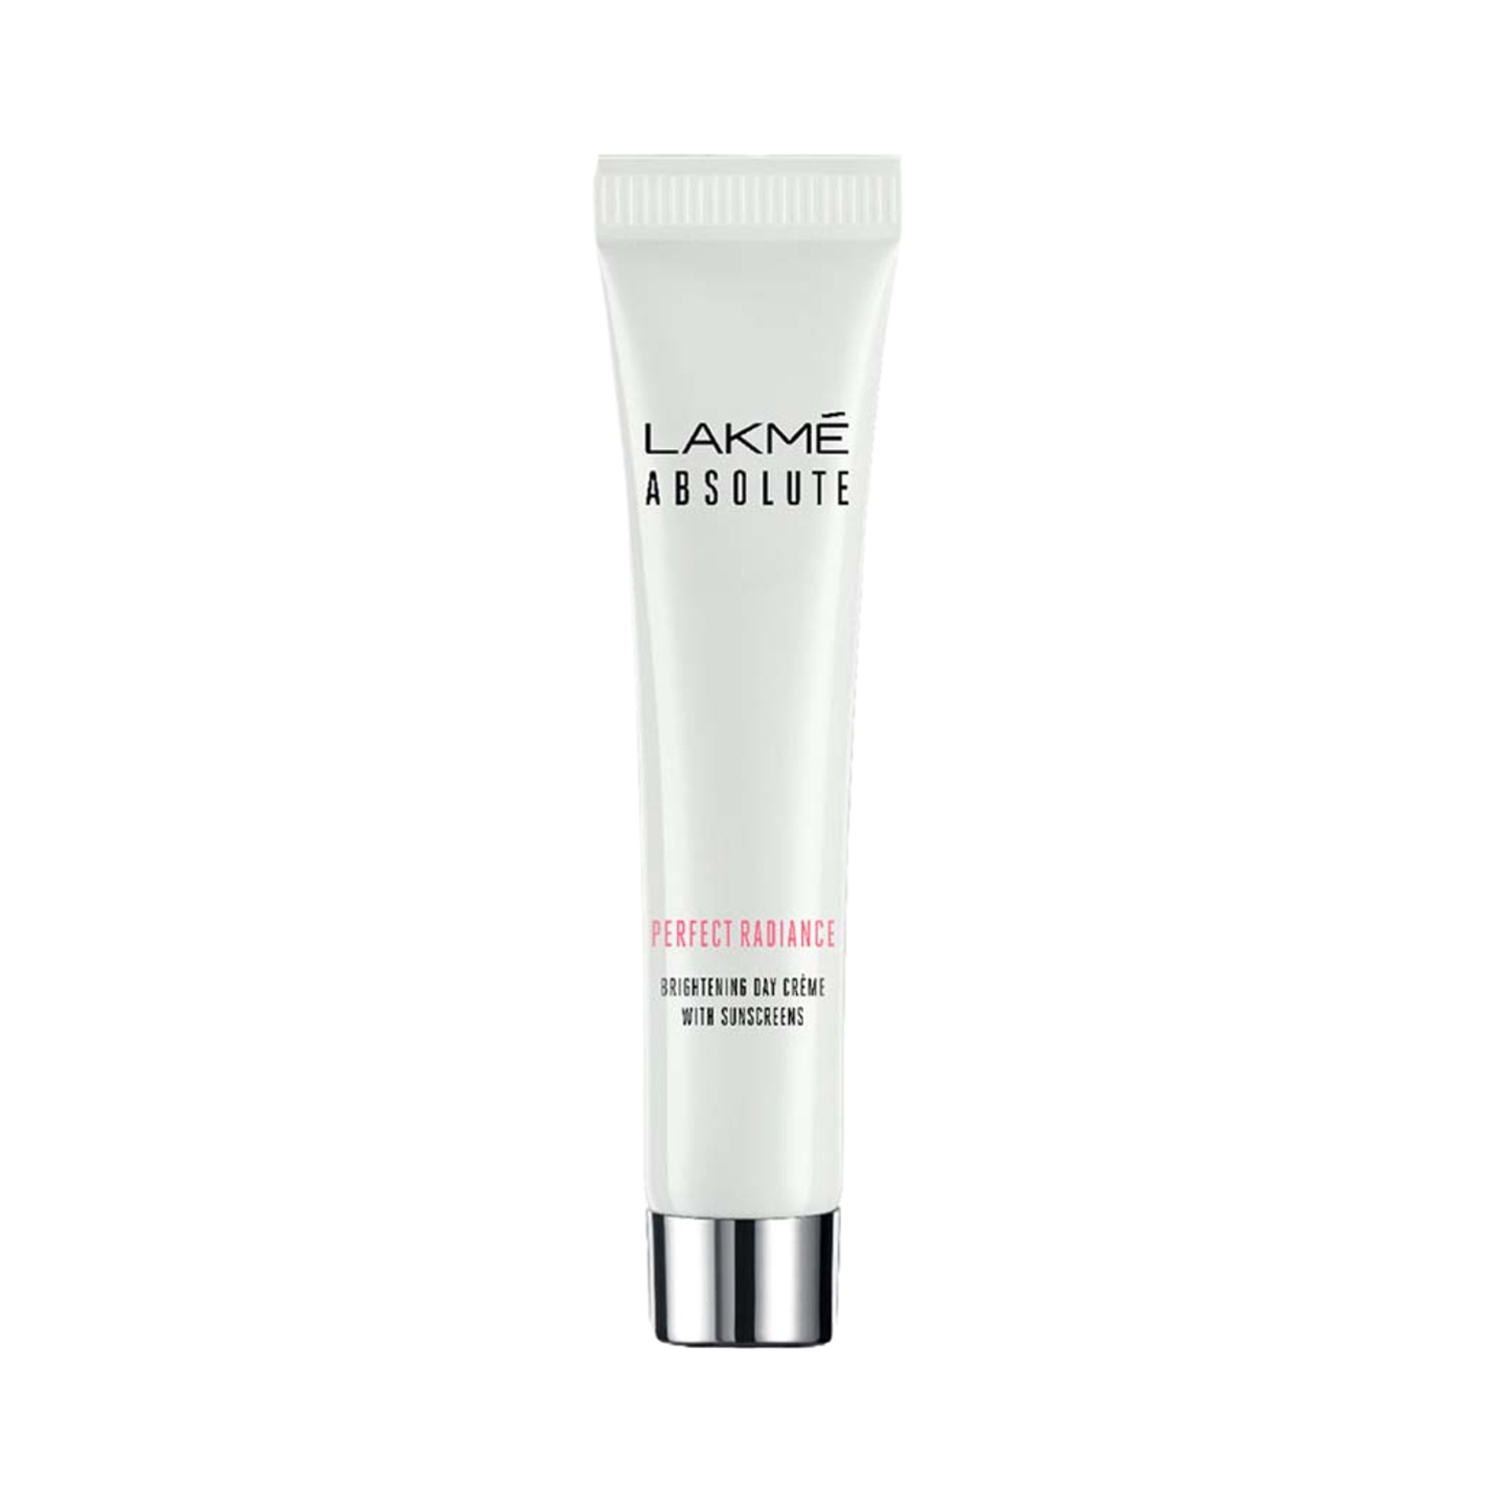 Lakme Absolute Perfect Radiance Skin Brightening Day Creme (15g)